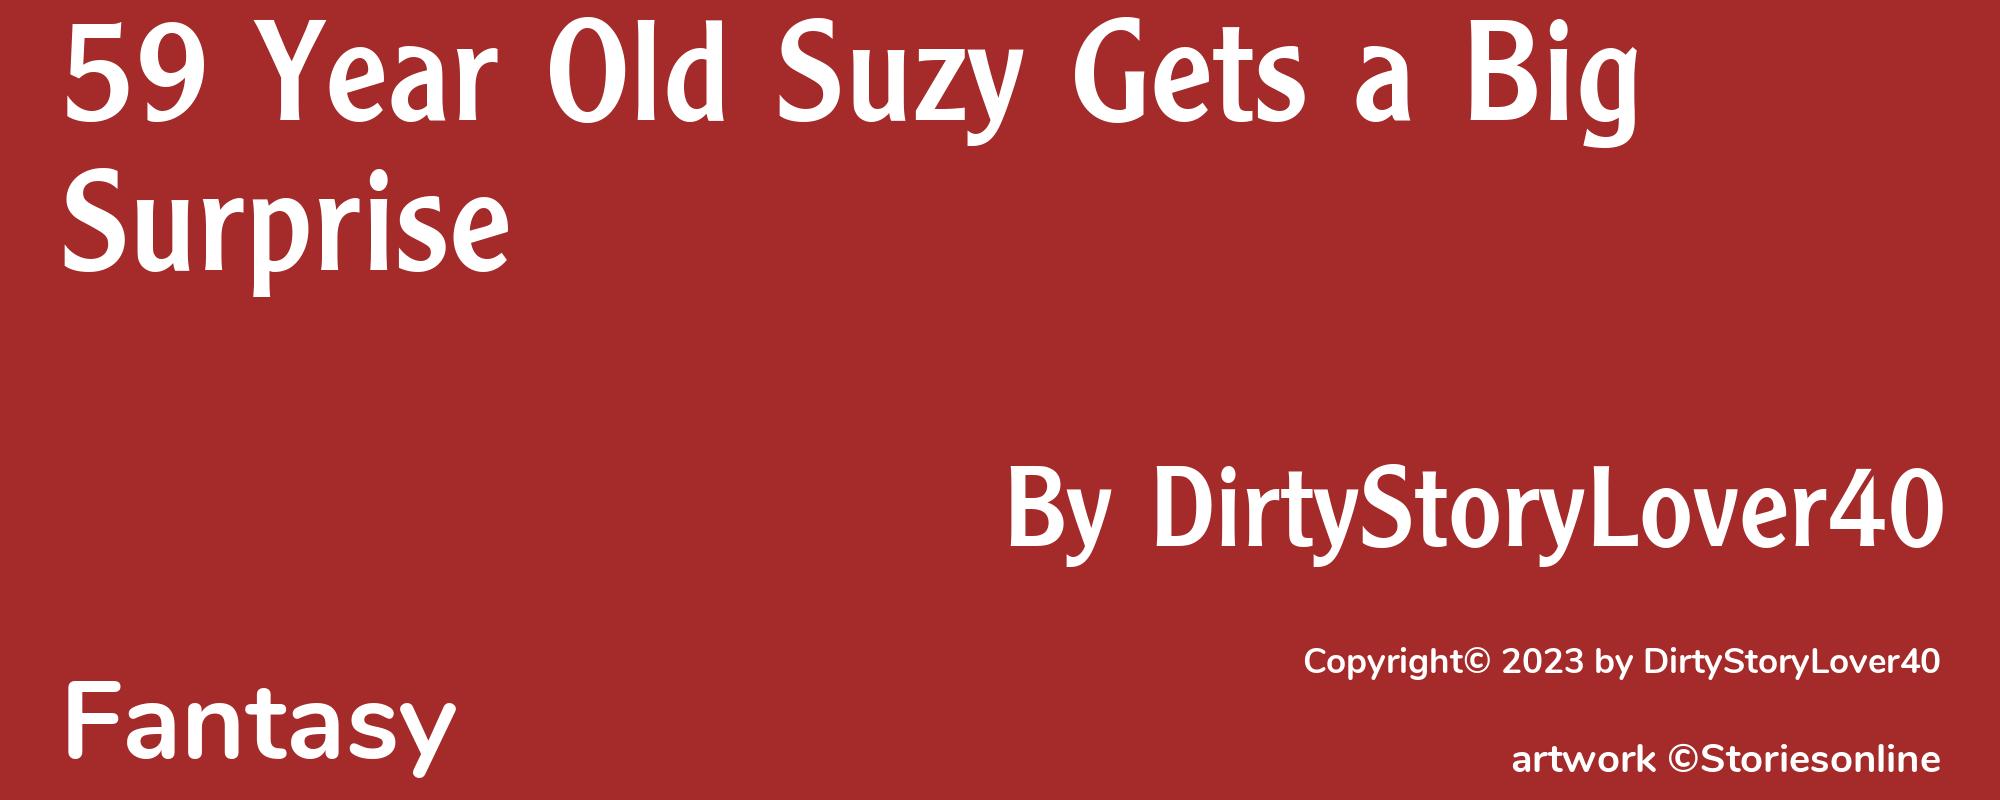 59 Year Old Suzy Gets a Big Surprise - Cover